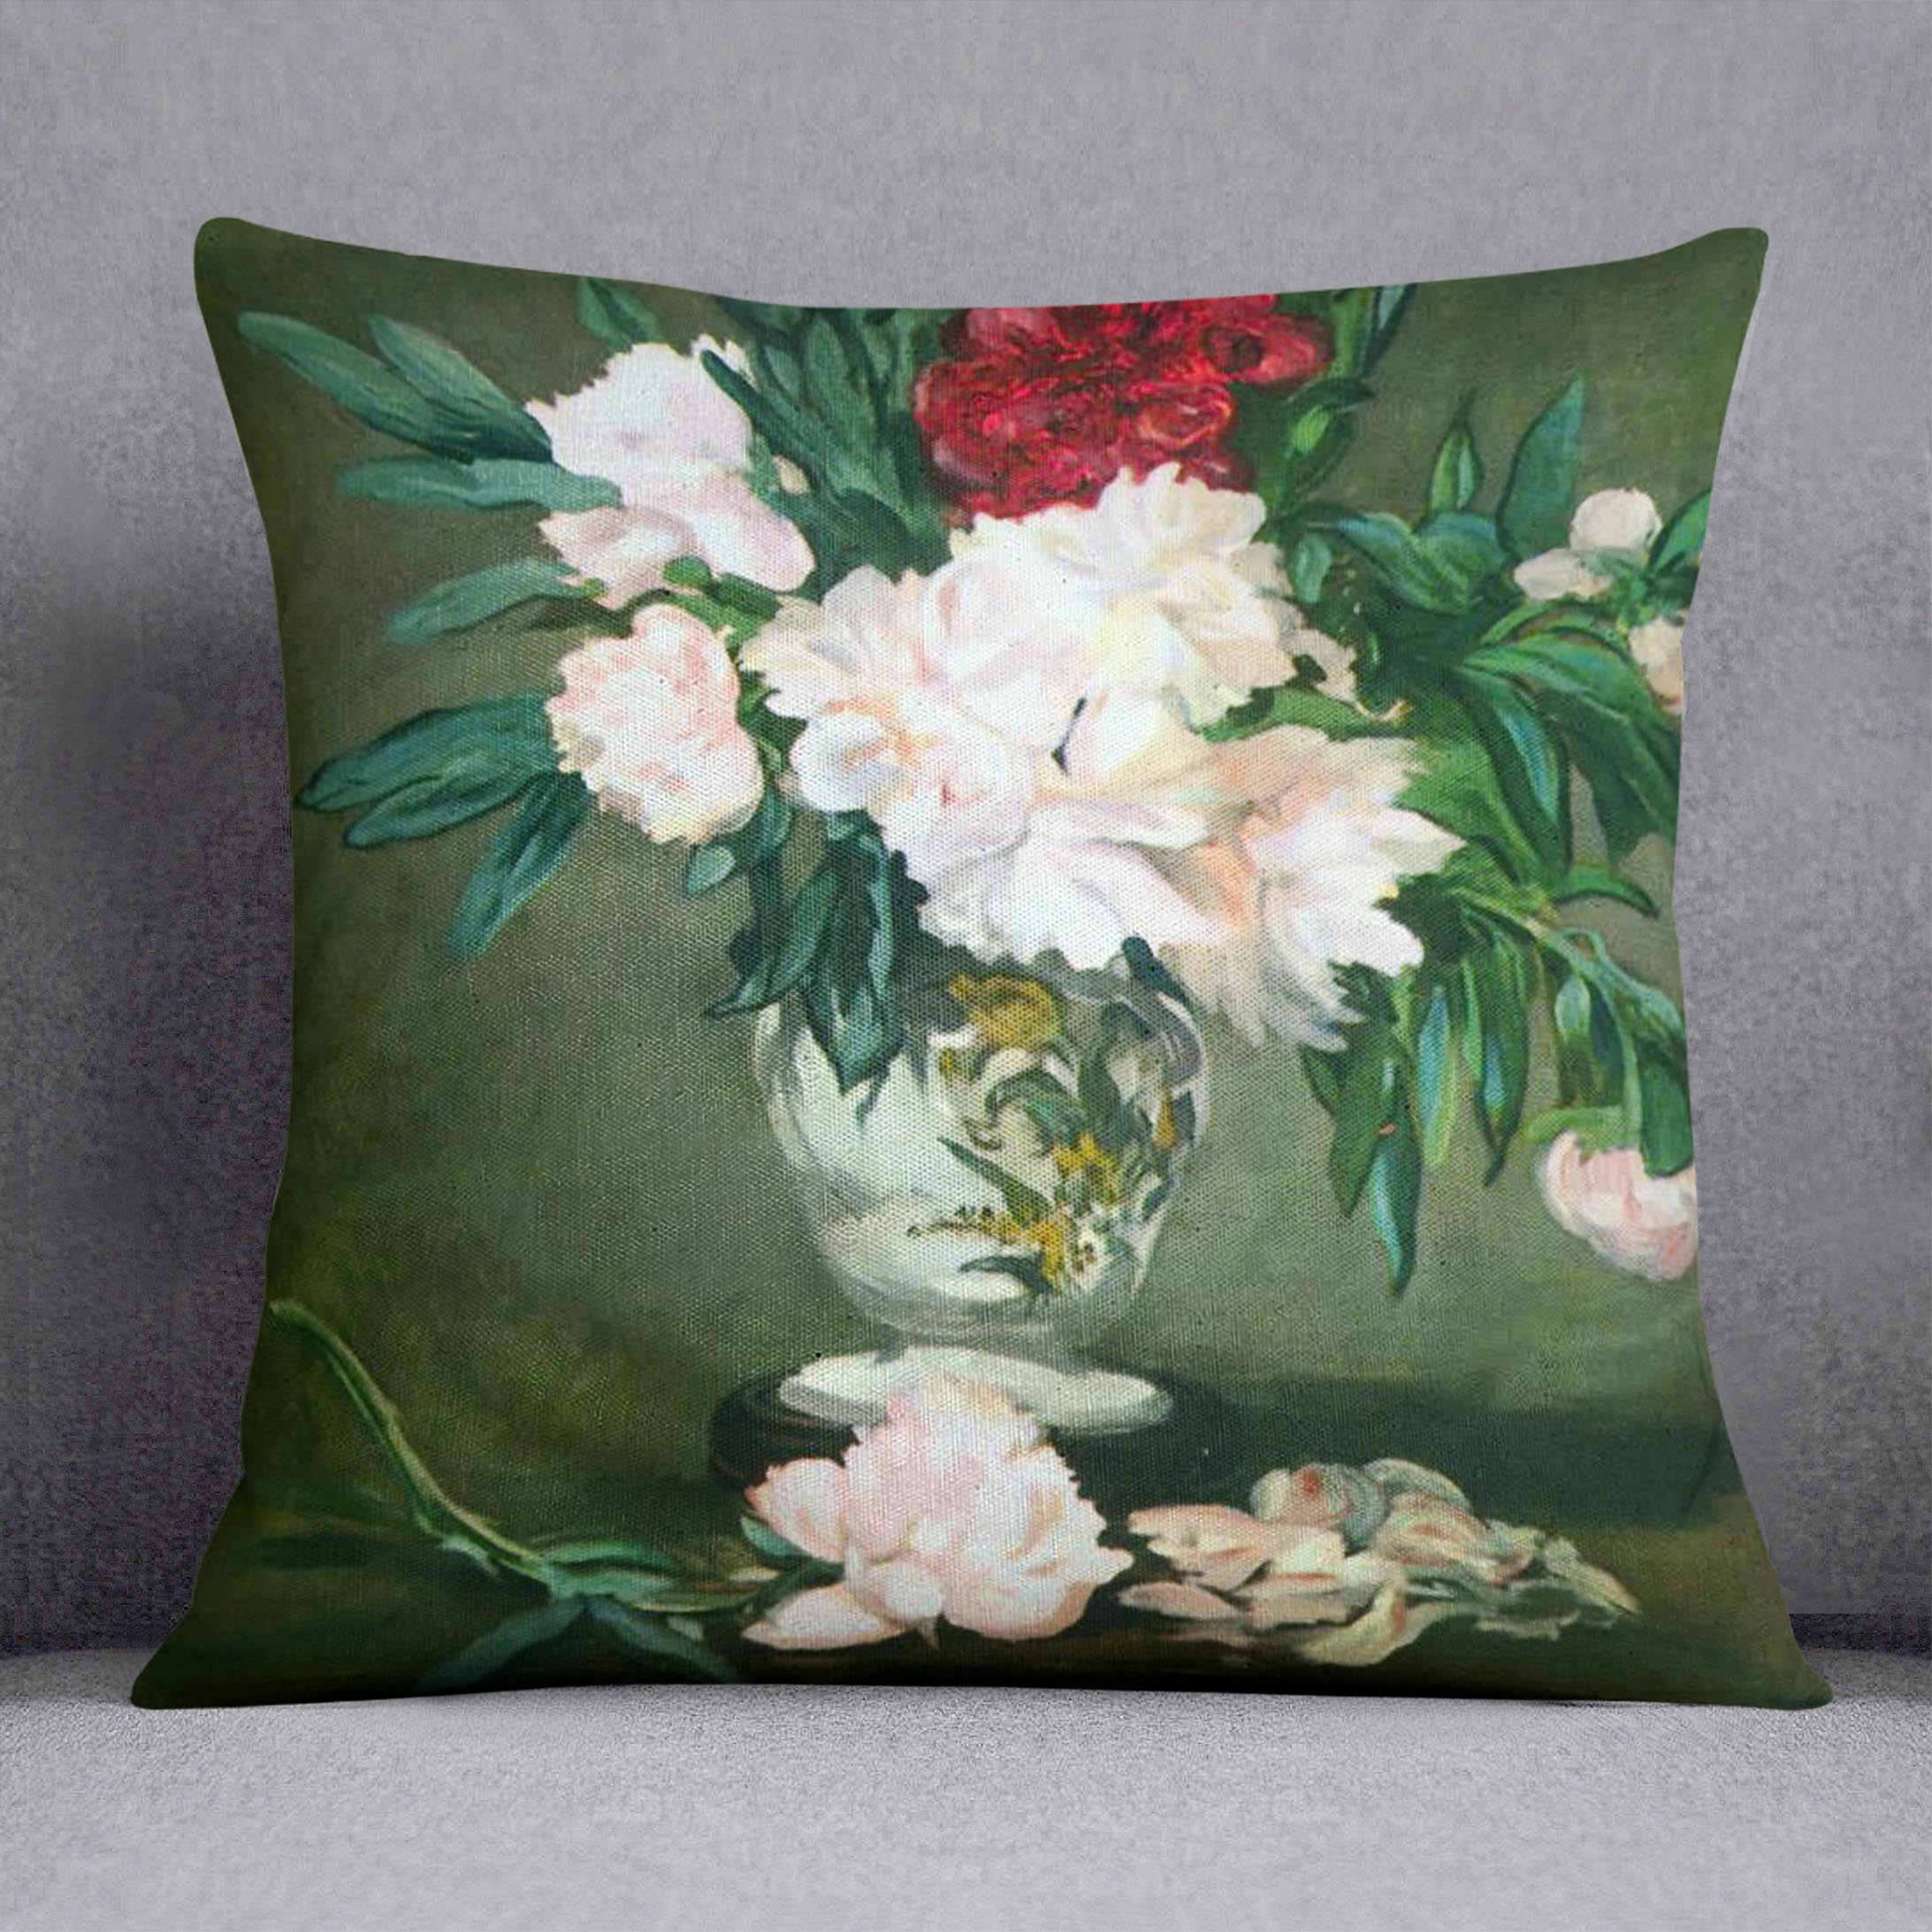 Still Life Vase with Peonies by Manet Cushion